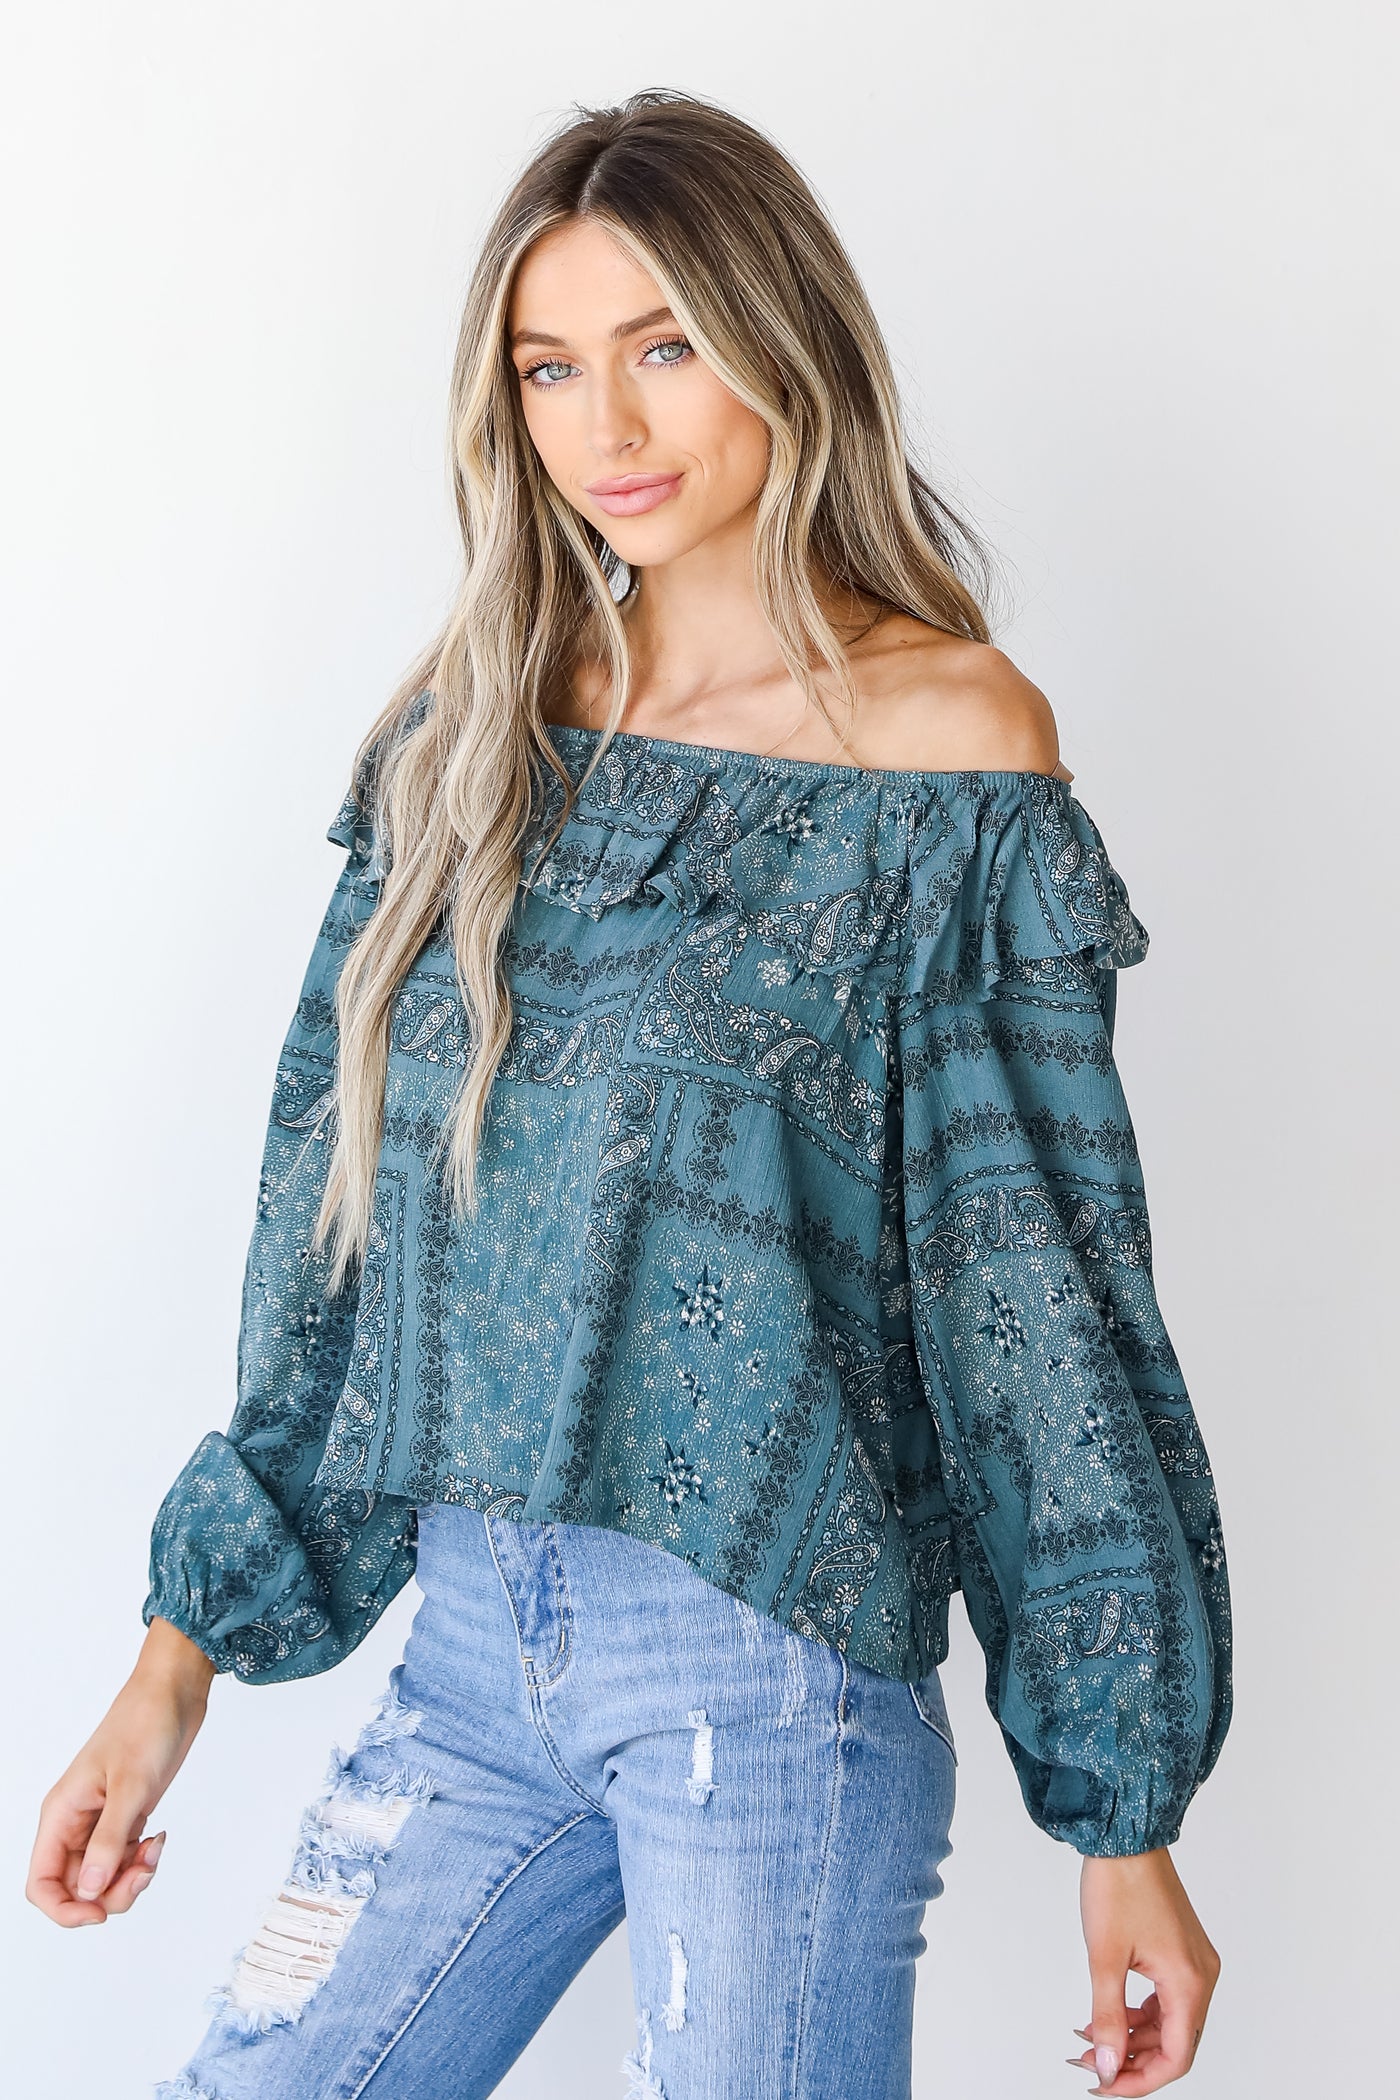 Floral Ruffle Blouse in teal side view